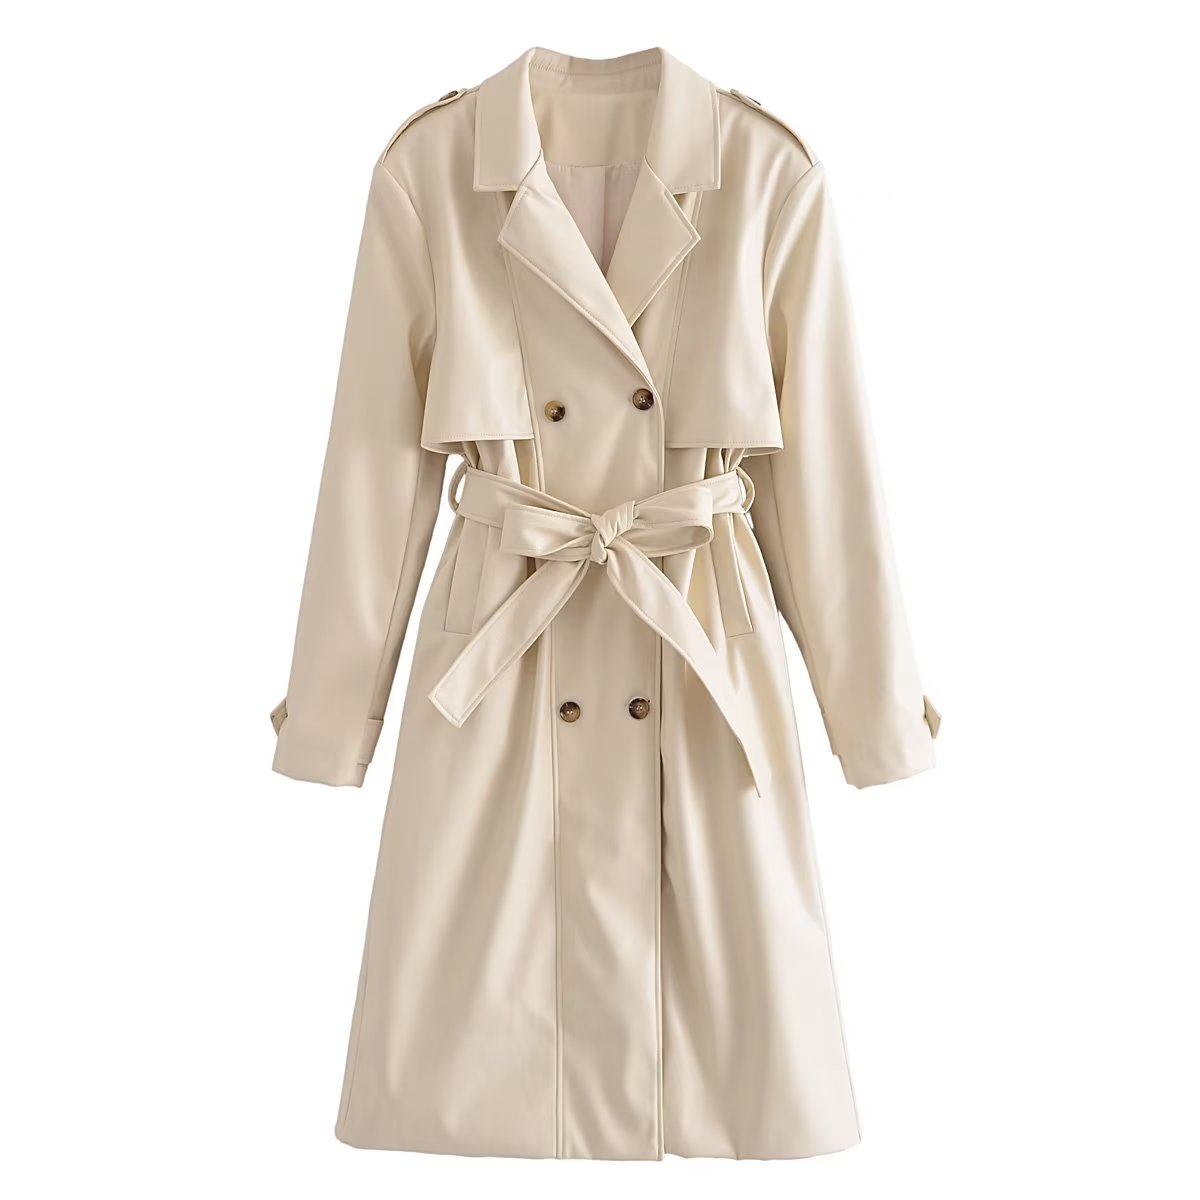 Spring Autumn  Casual Women Blazer Collar Button Decoration Faux Leather Belt Trench Coat